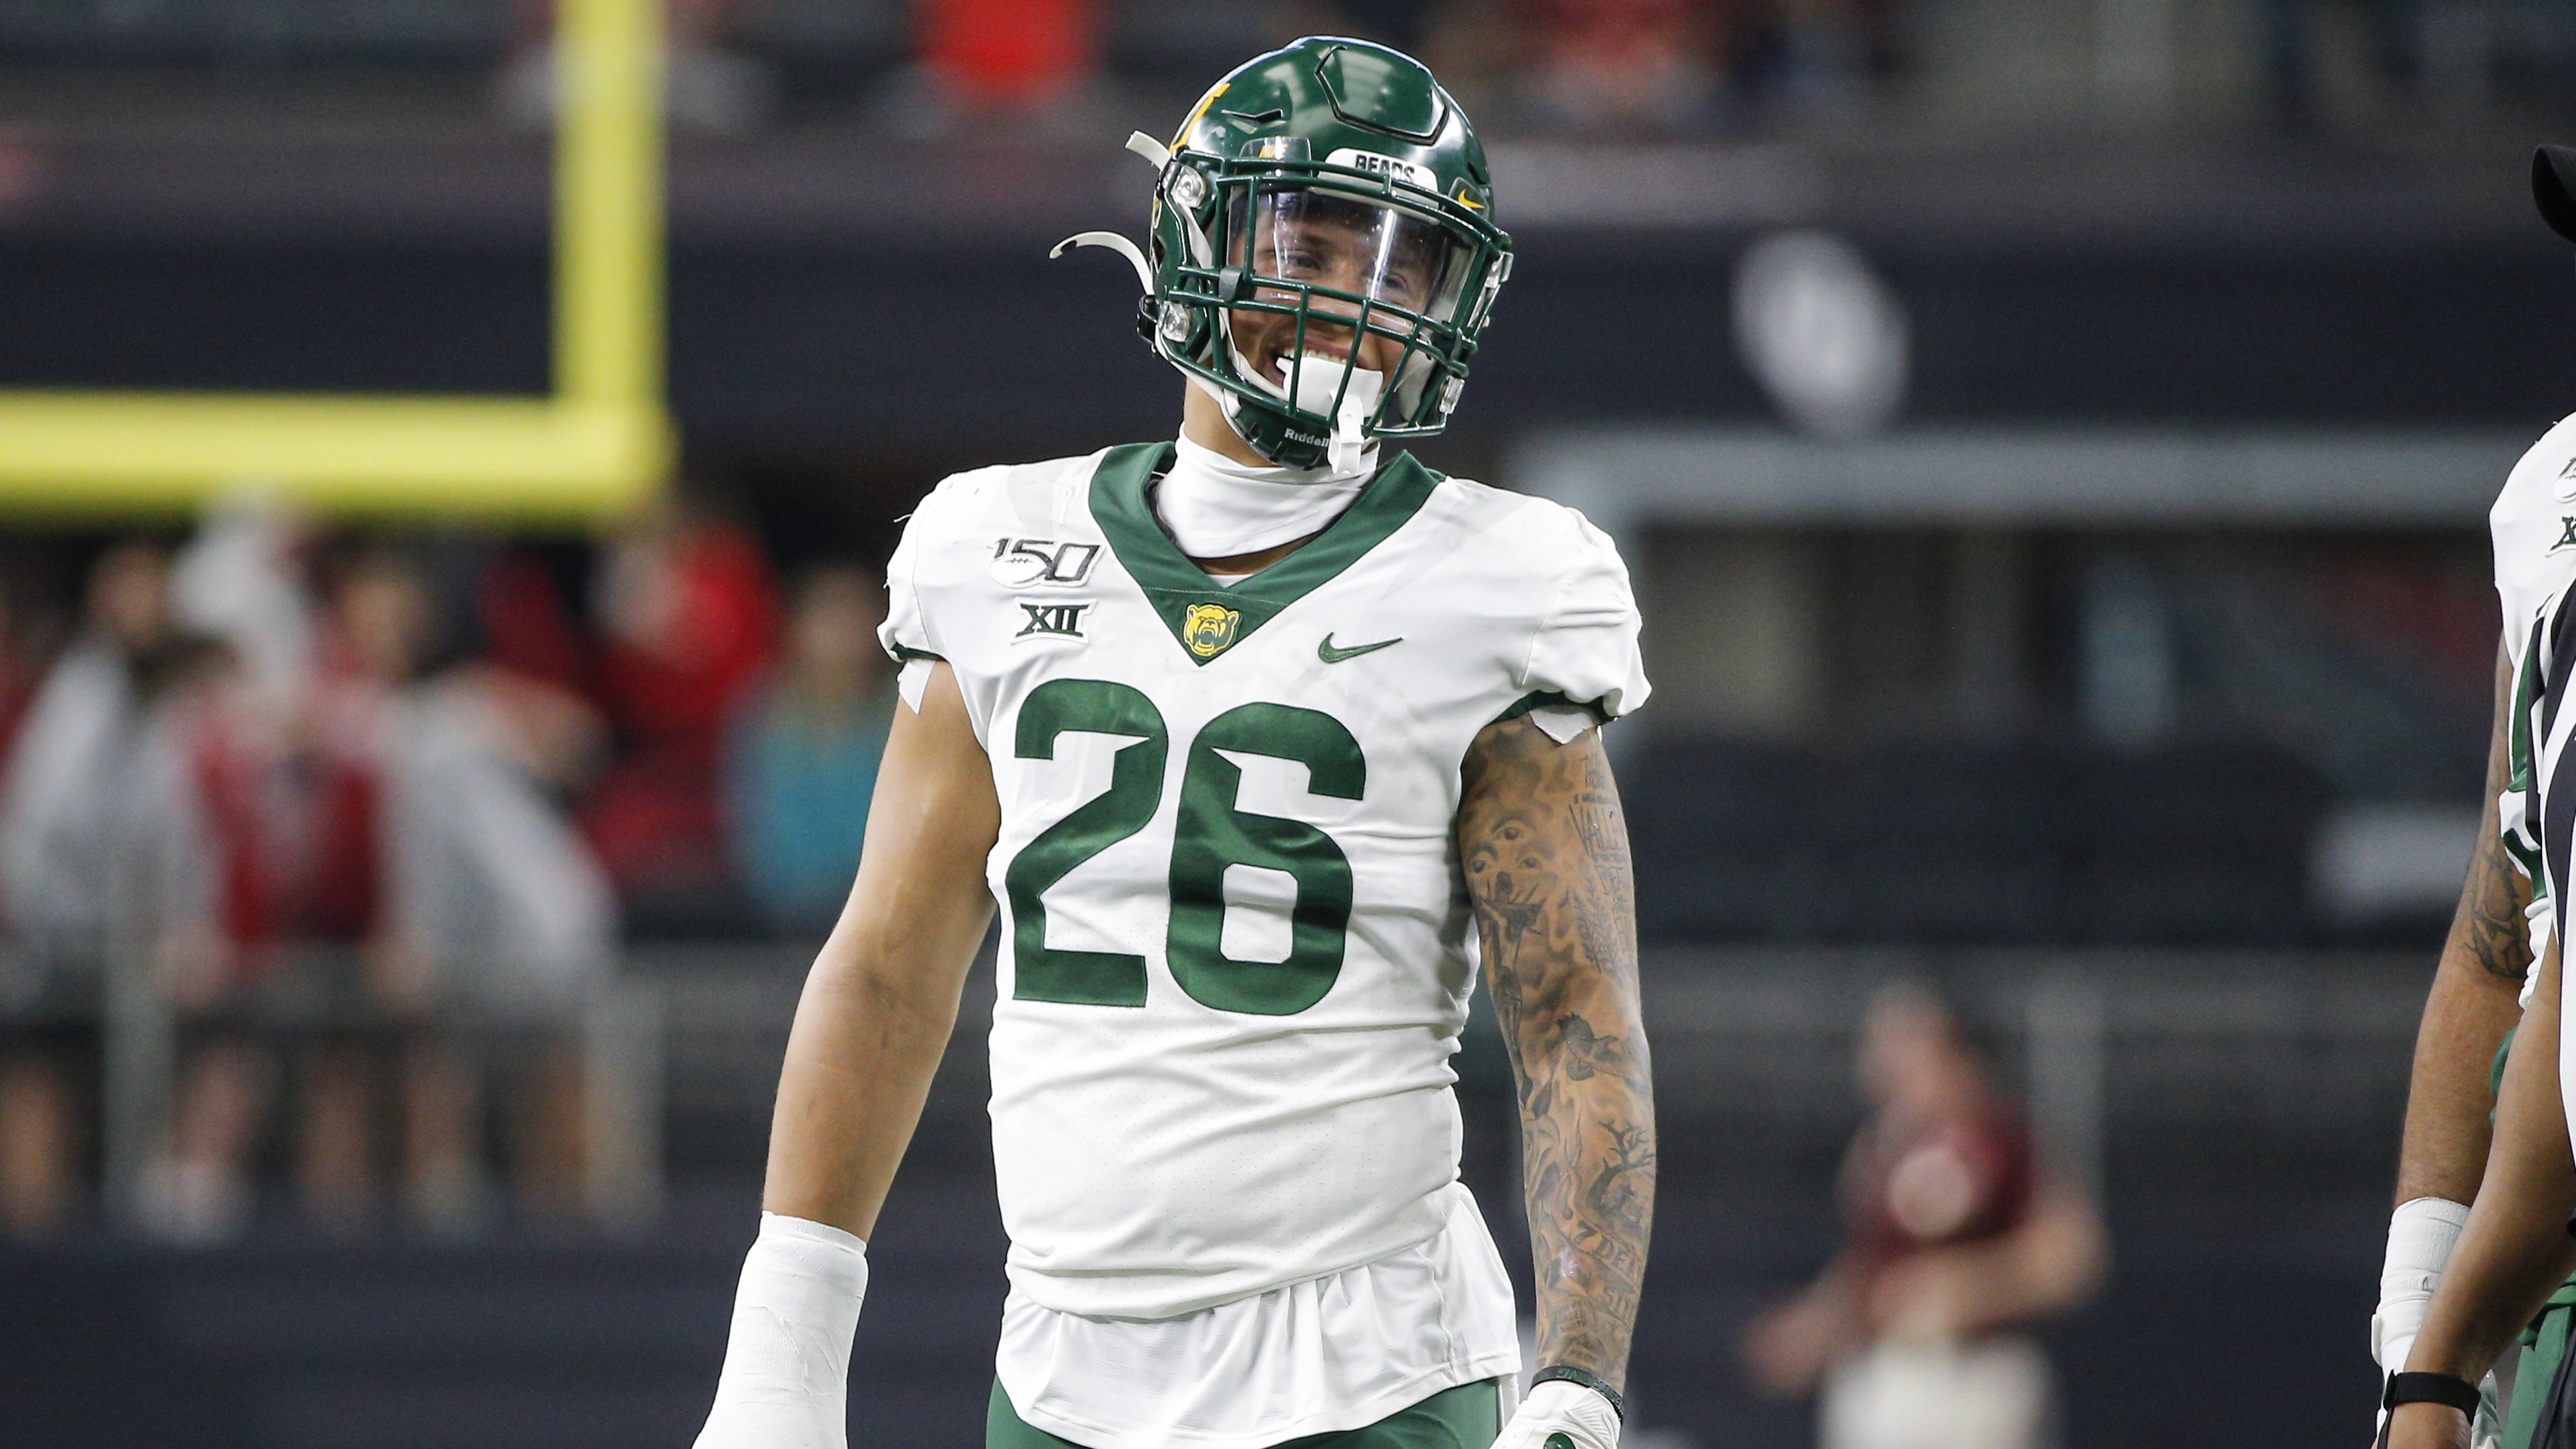 Baylor needs someone to step up after devastating injuries to LB